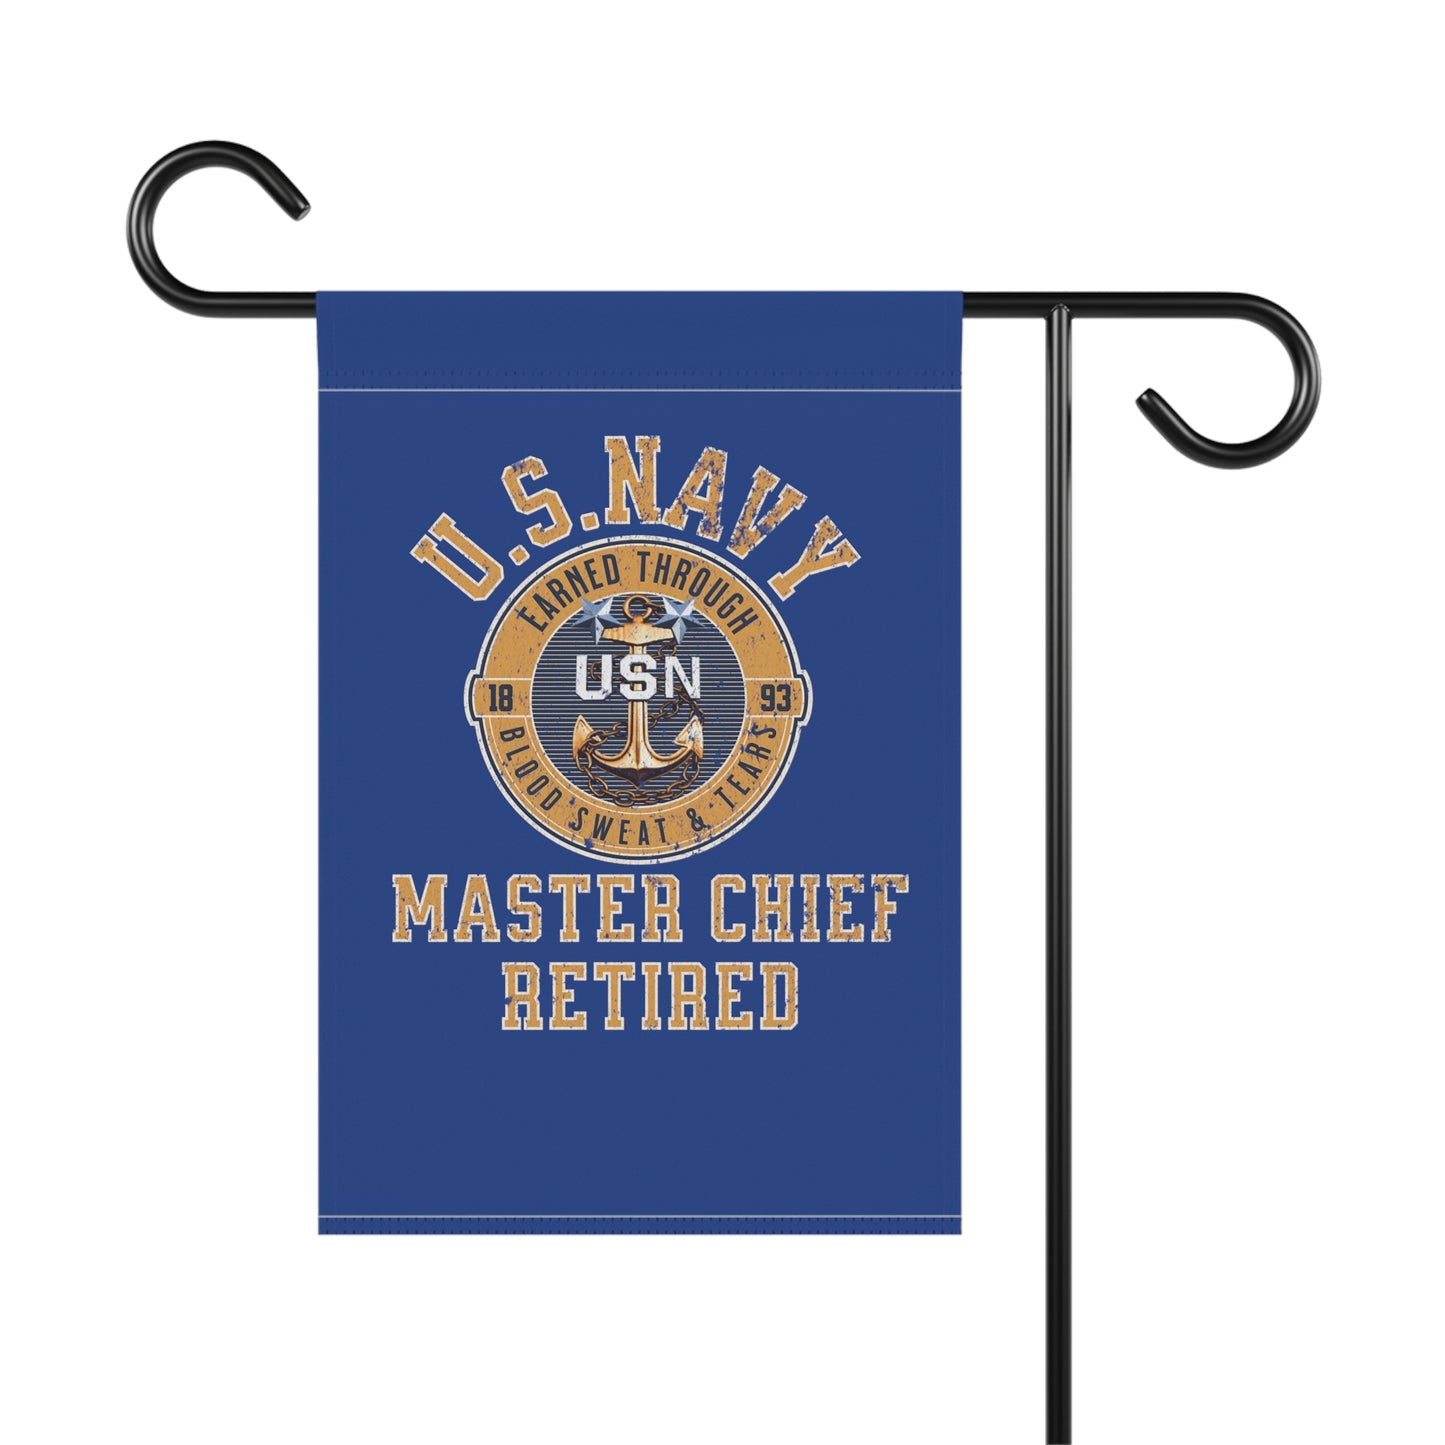 Copy of US Navy Master Chief Garden & House Banner